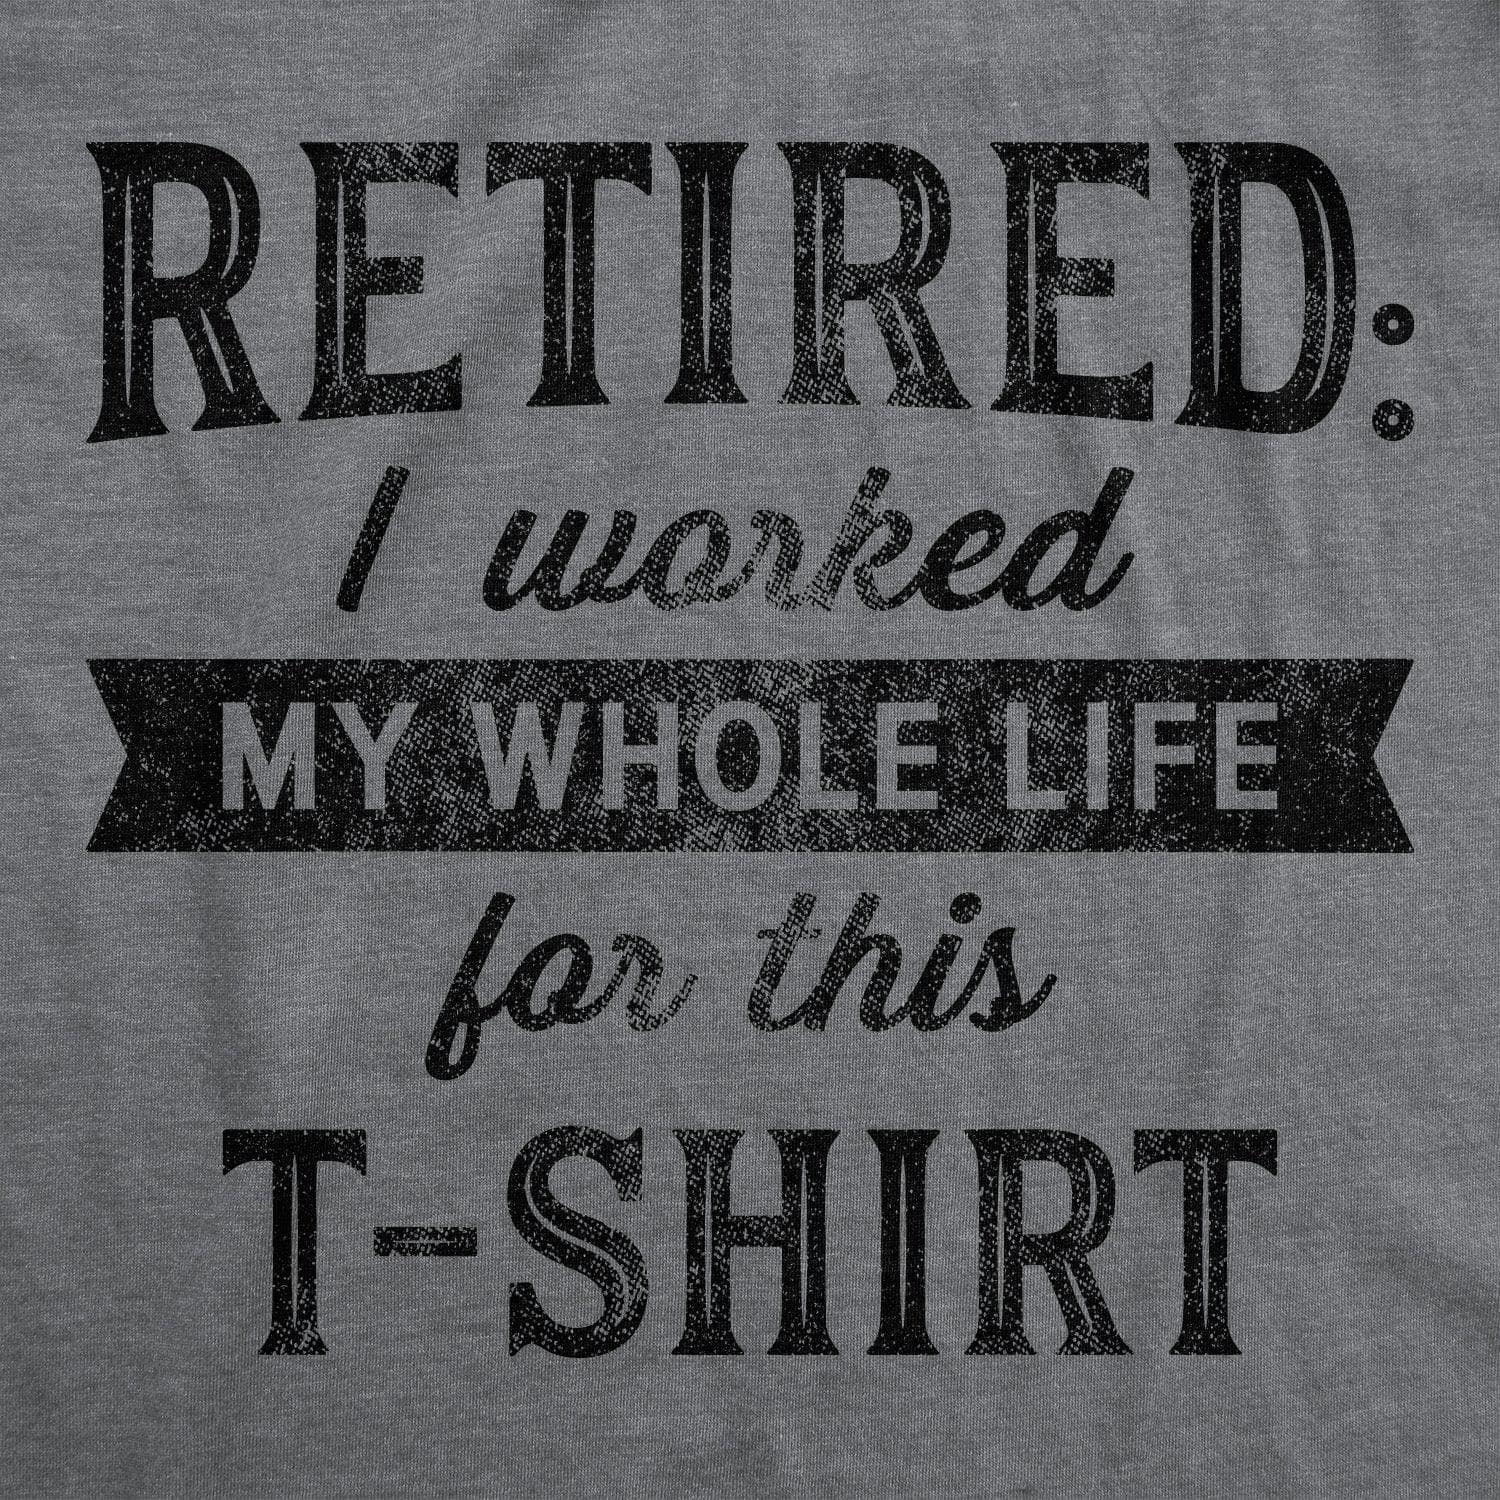 Retired I Worked My Whole Life For This Shirt Men's Tshirt  -  Crazy Dog T-Shirts